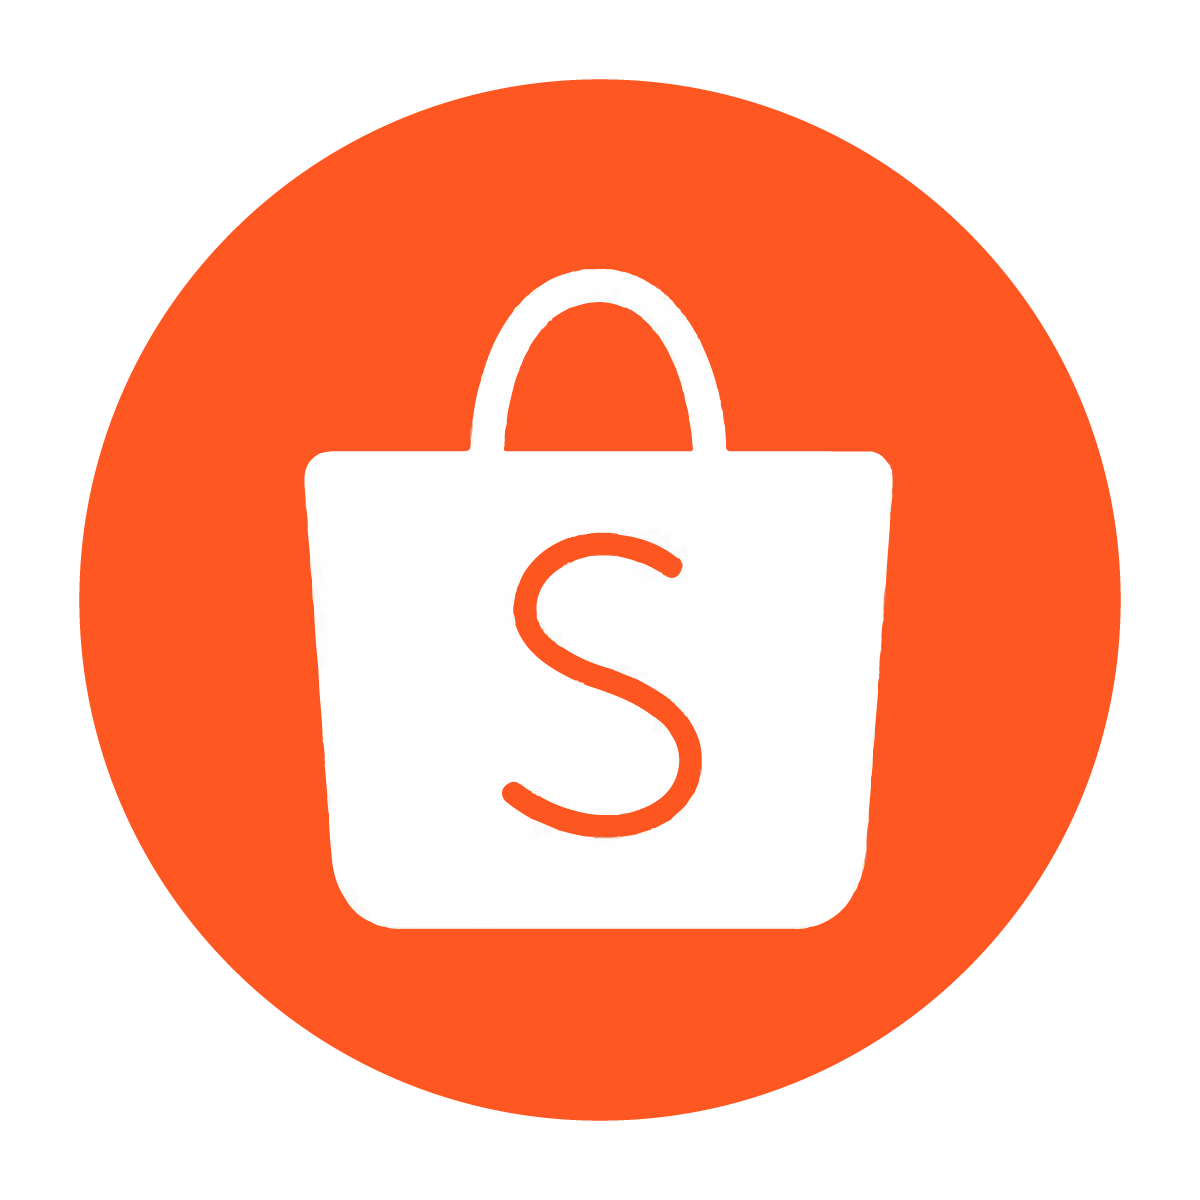 Shopee-Icon.png